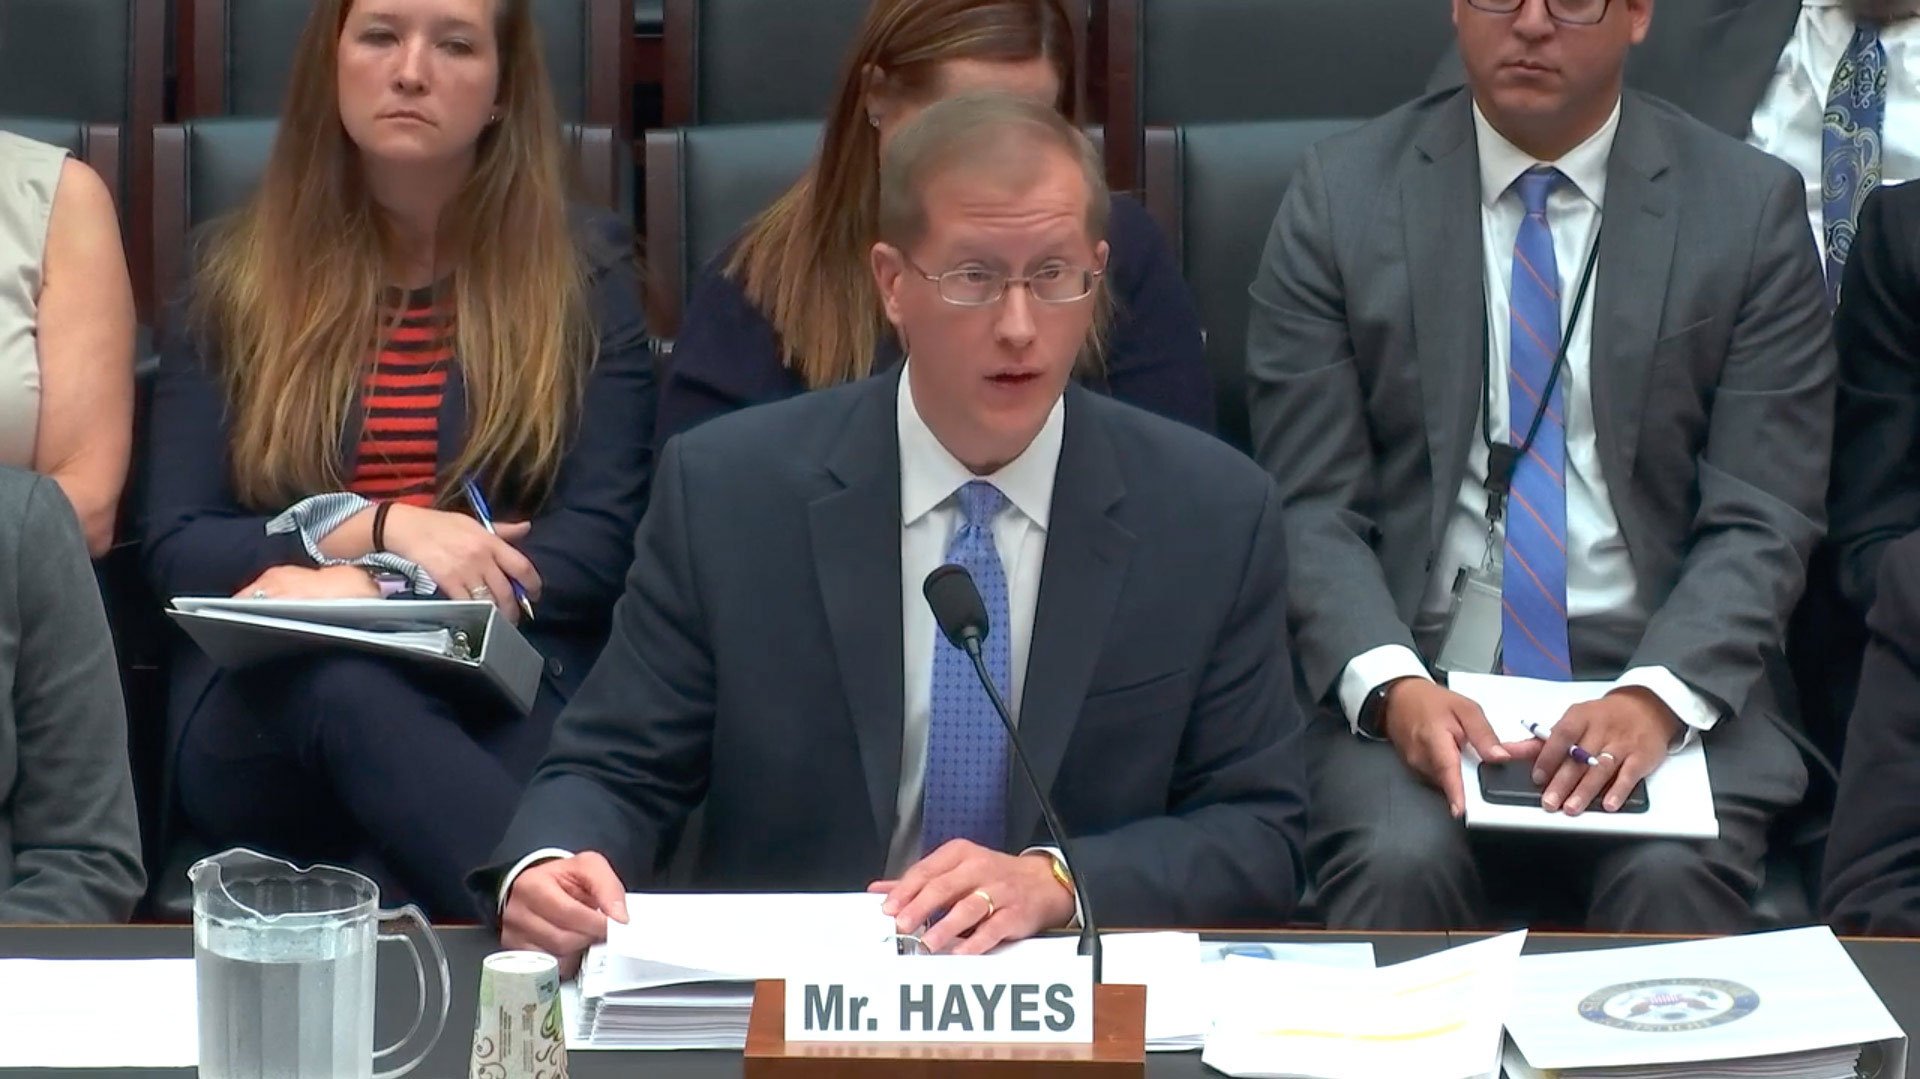 Jonathan Hayes, director of the Office of Refugee Resettlement, gives testimony in the House of Representatives on September 19, 2019.